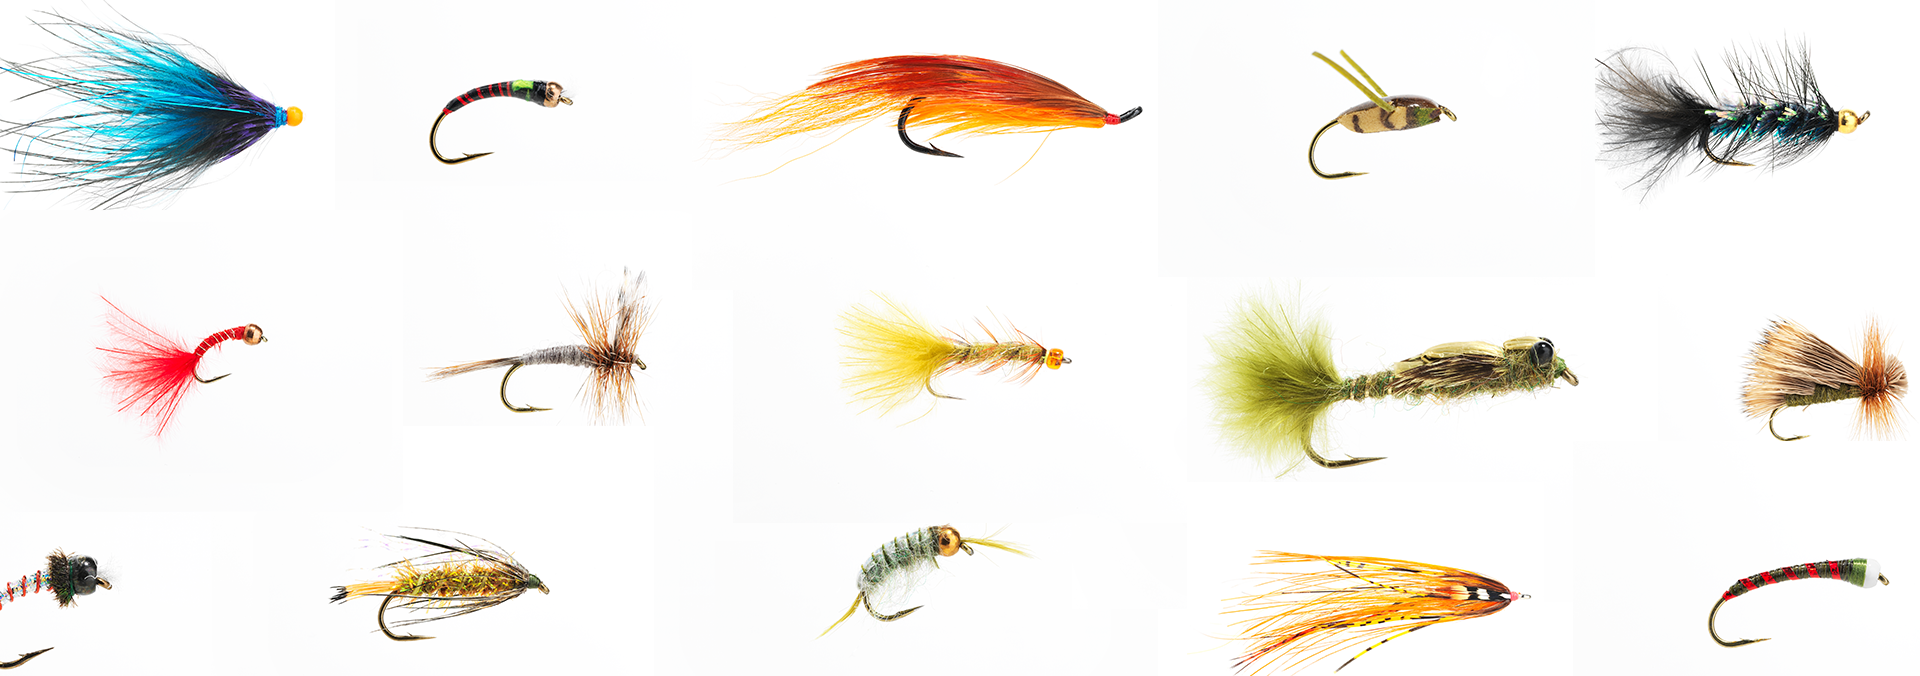 4 Different Types of Fly Fishing Flies And How to Use Them - The Fly Crate